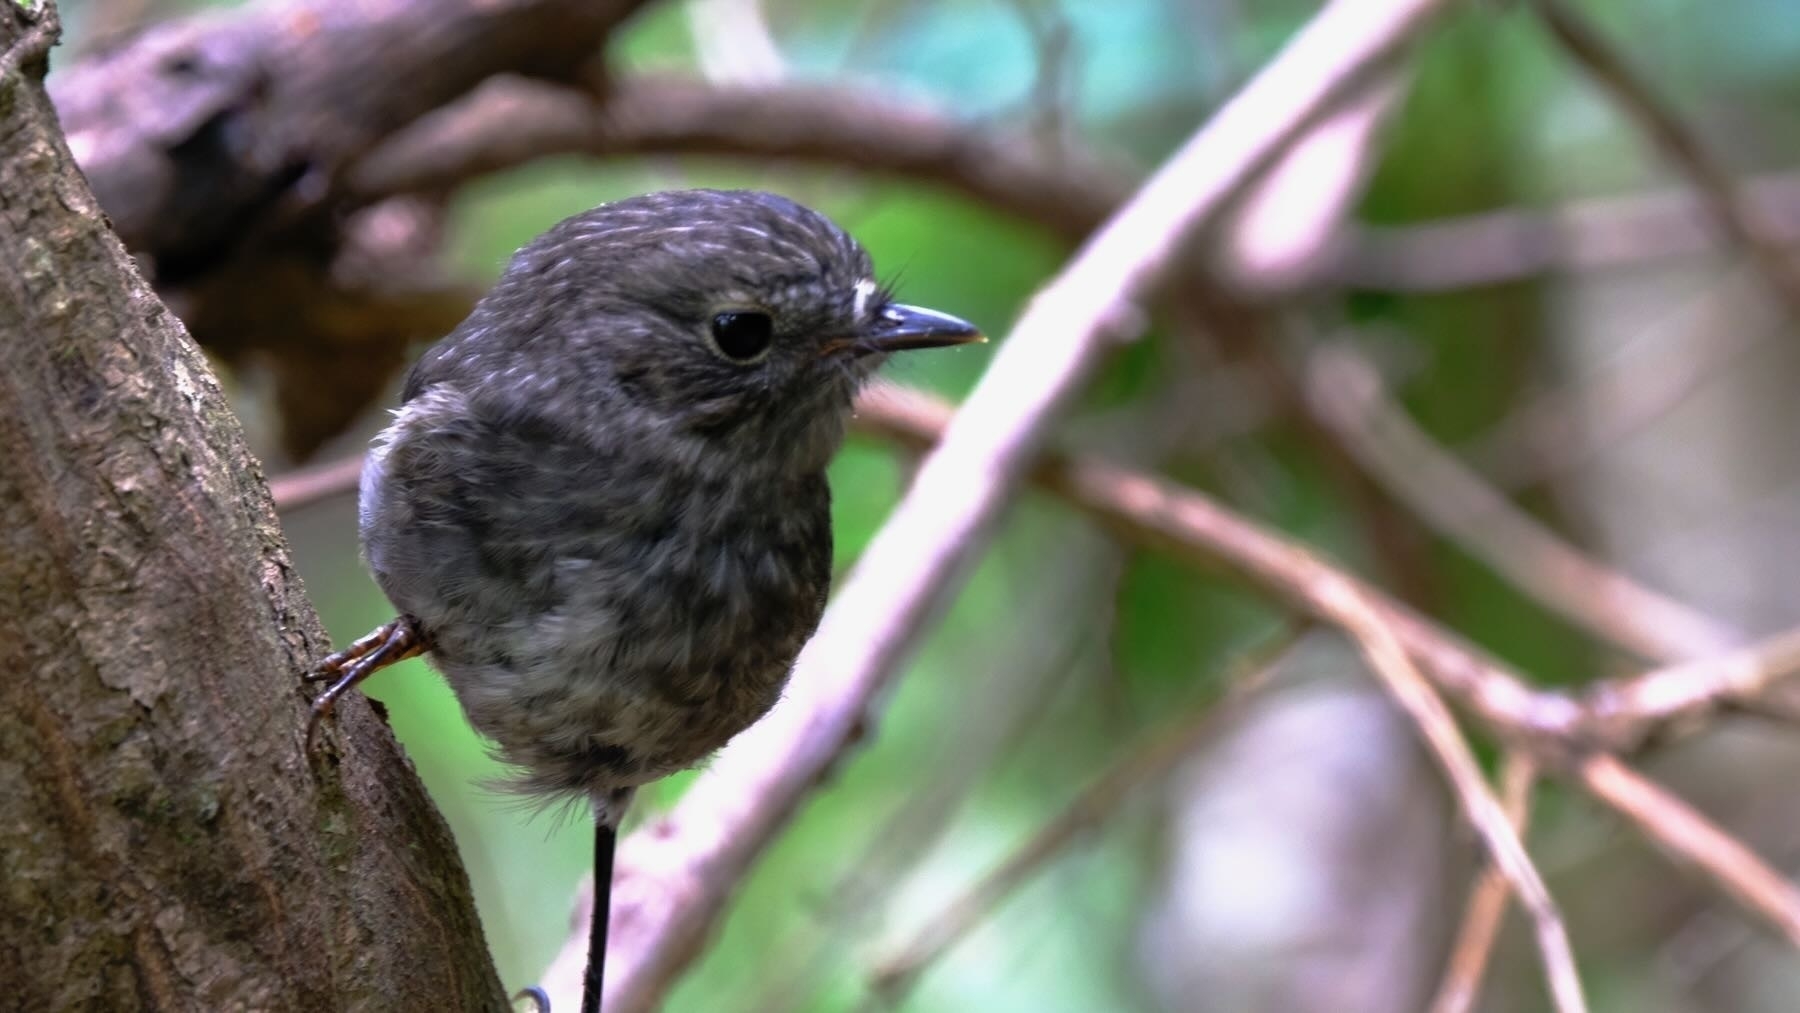 Small dark bird on a tree branch, looking at the camera. 